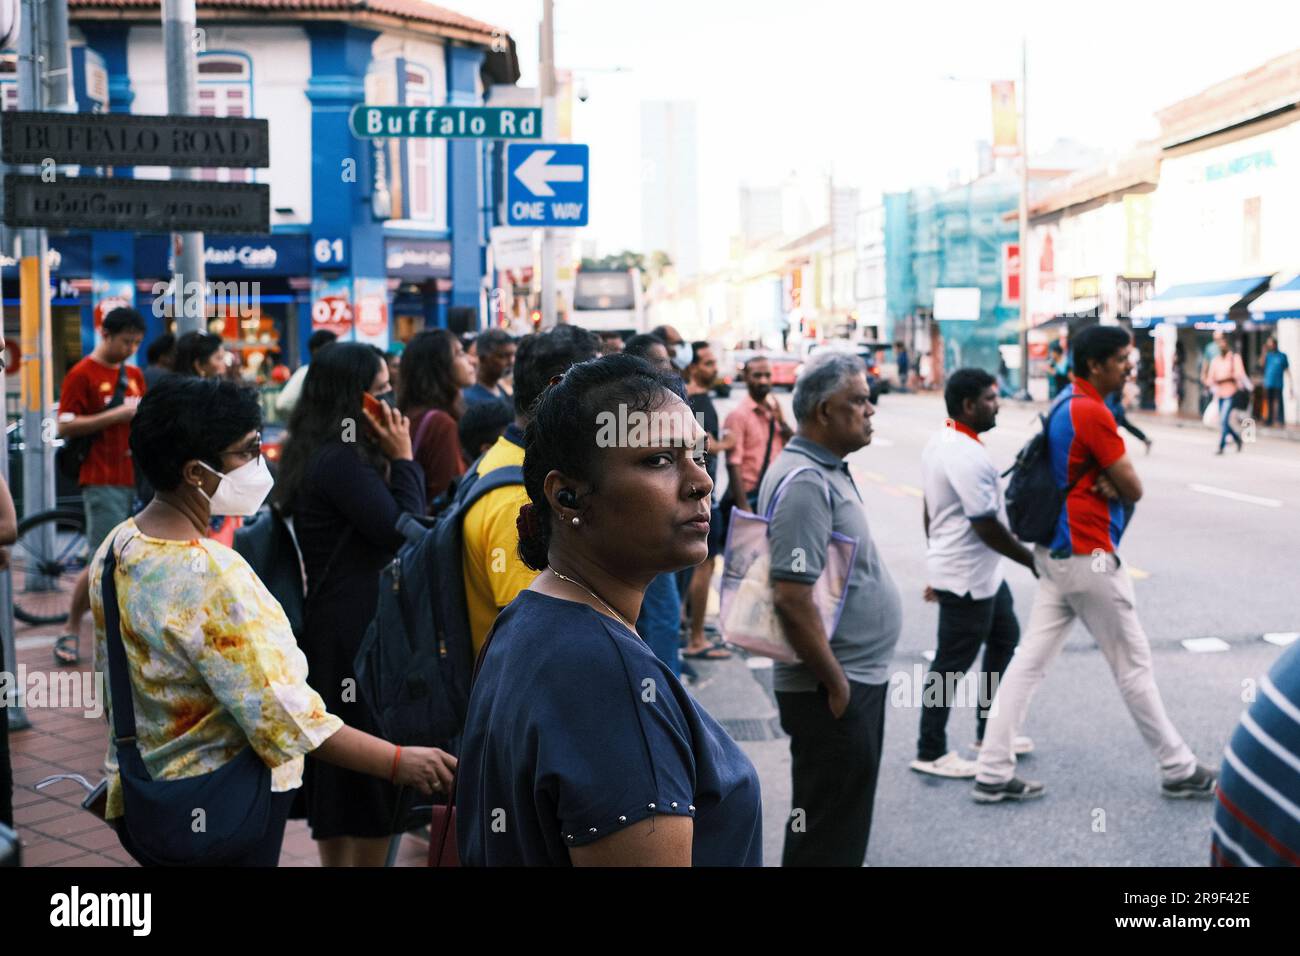 A woman crossing a busy city street with a diverse crowd of people in the background Stock Photo